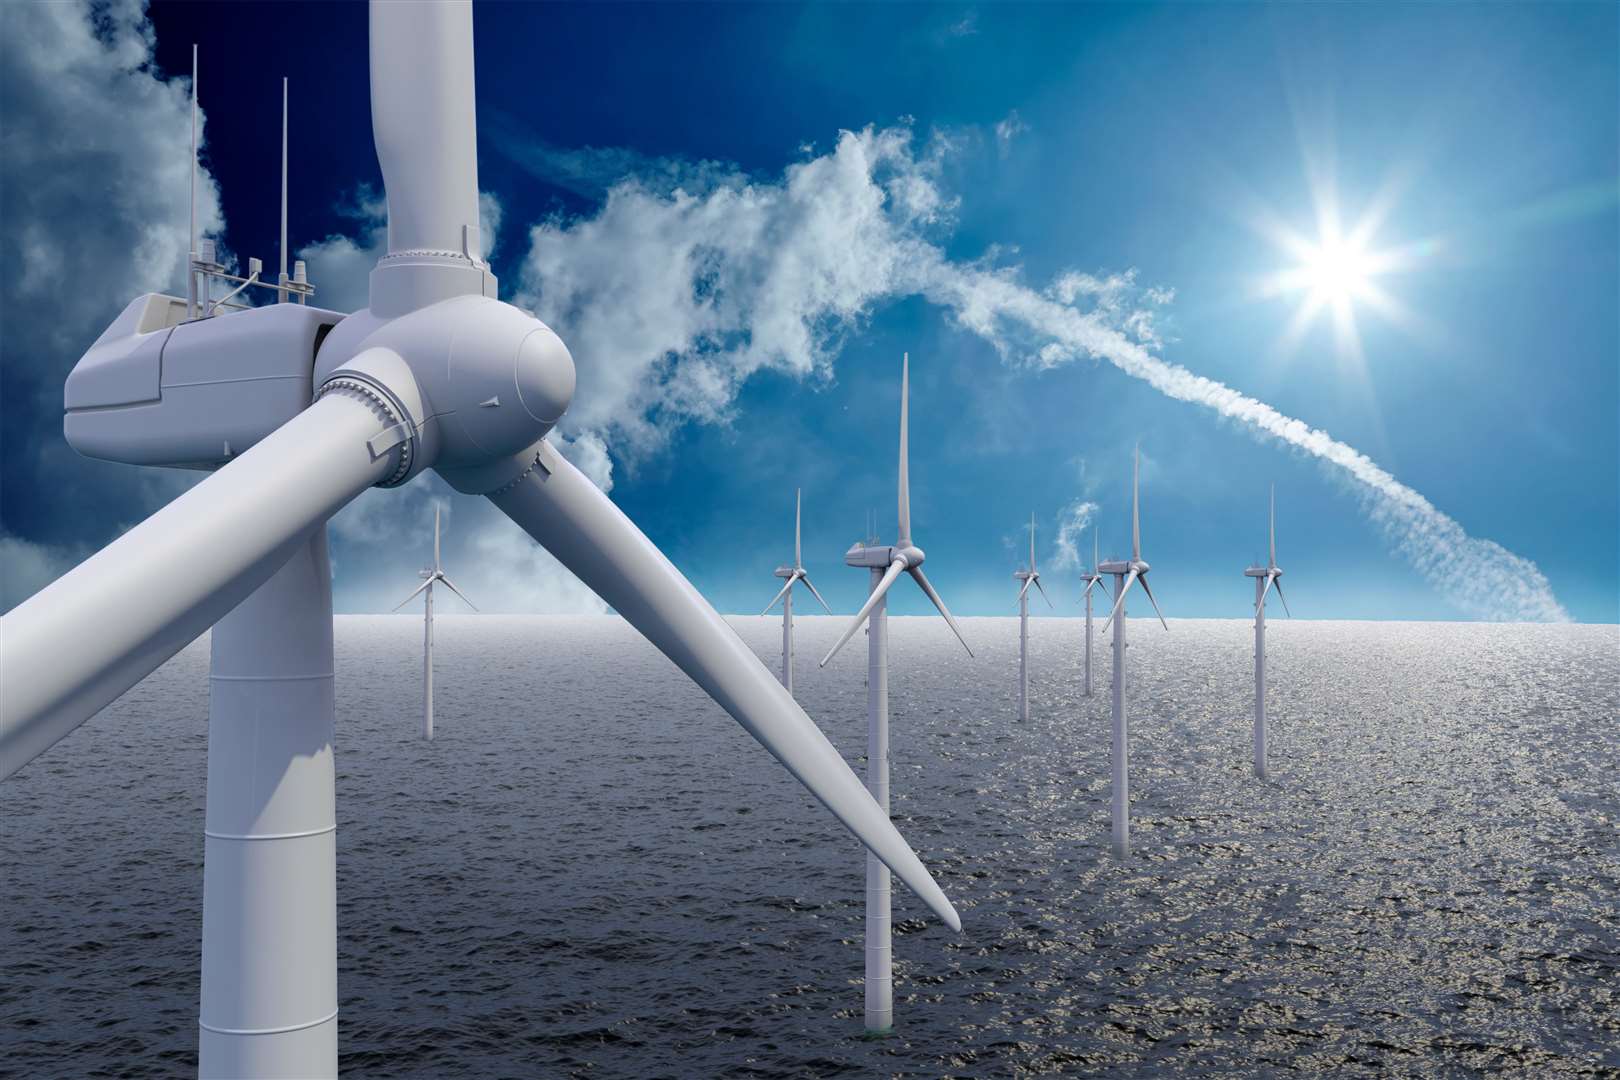 The UK is the world leader in offshore wind, with more installed capacity than any other country.